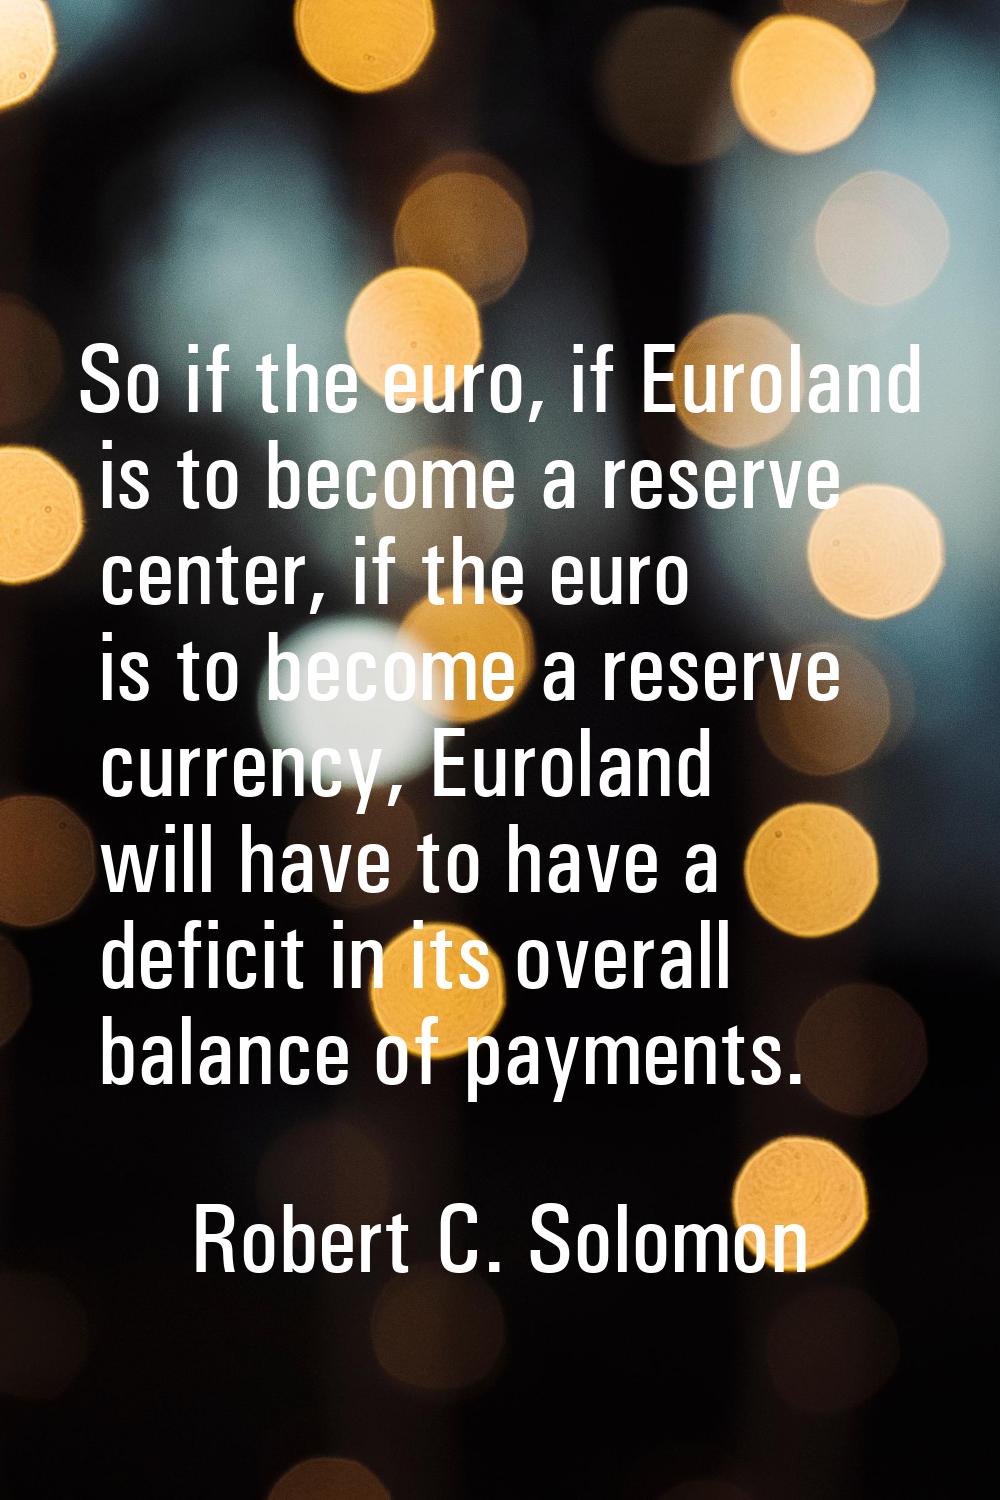 So if the euro, if Euroland is to become a reserve center, if the euro is to become a reserve curre